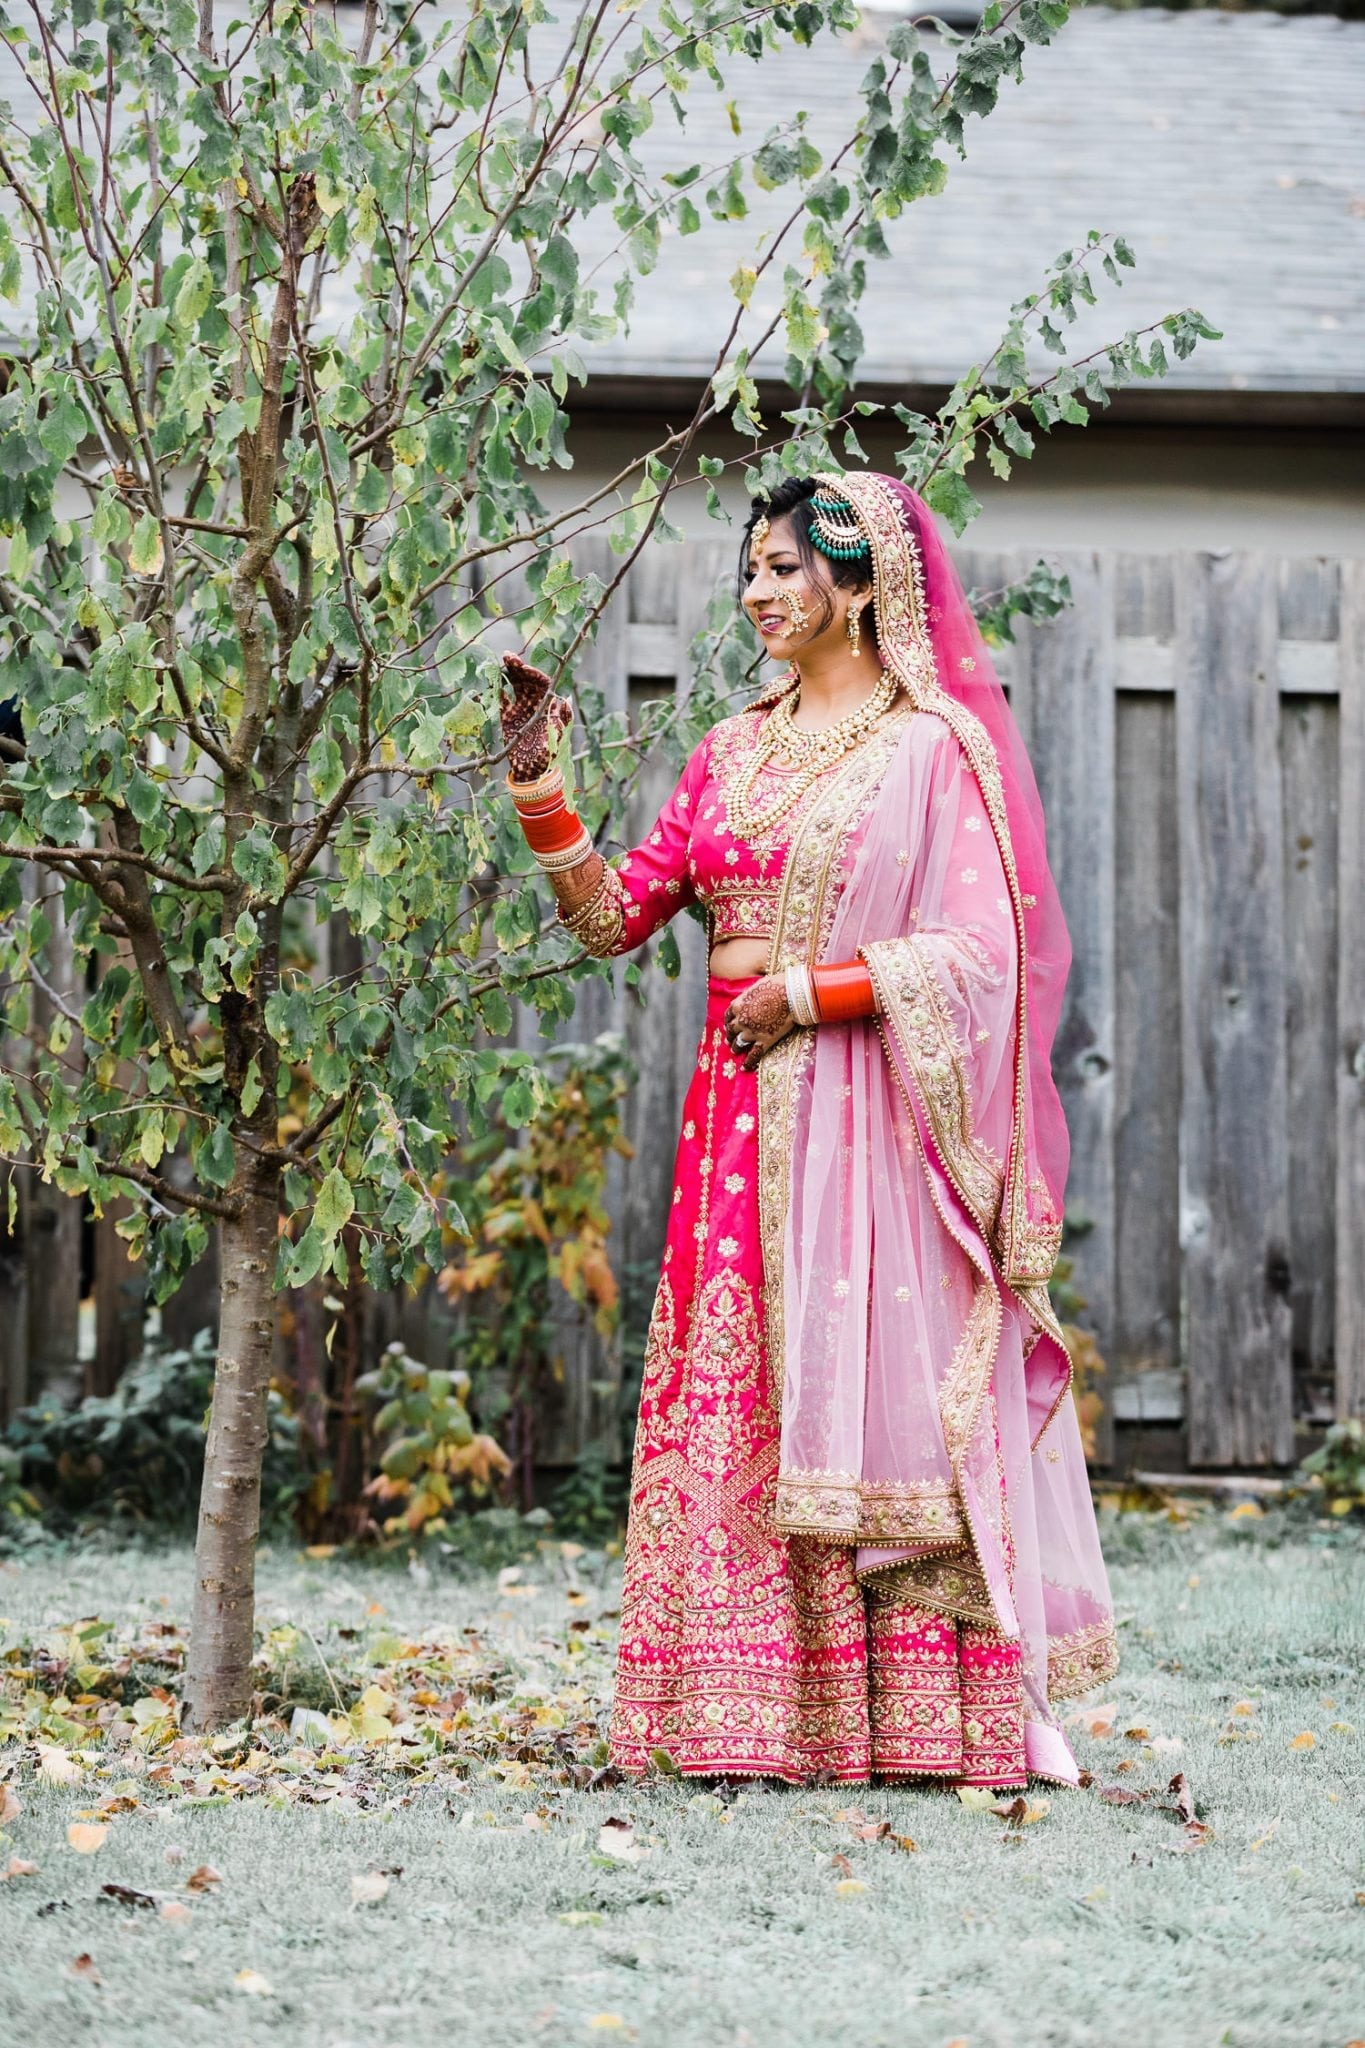 Indian bride in her outfit | Indian wedding photography Vancouver